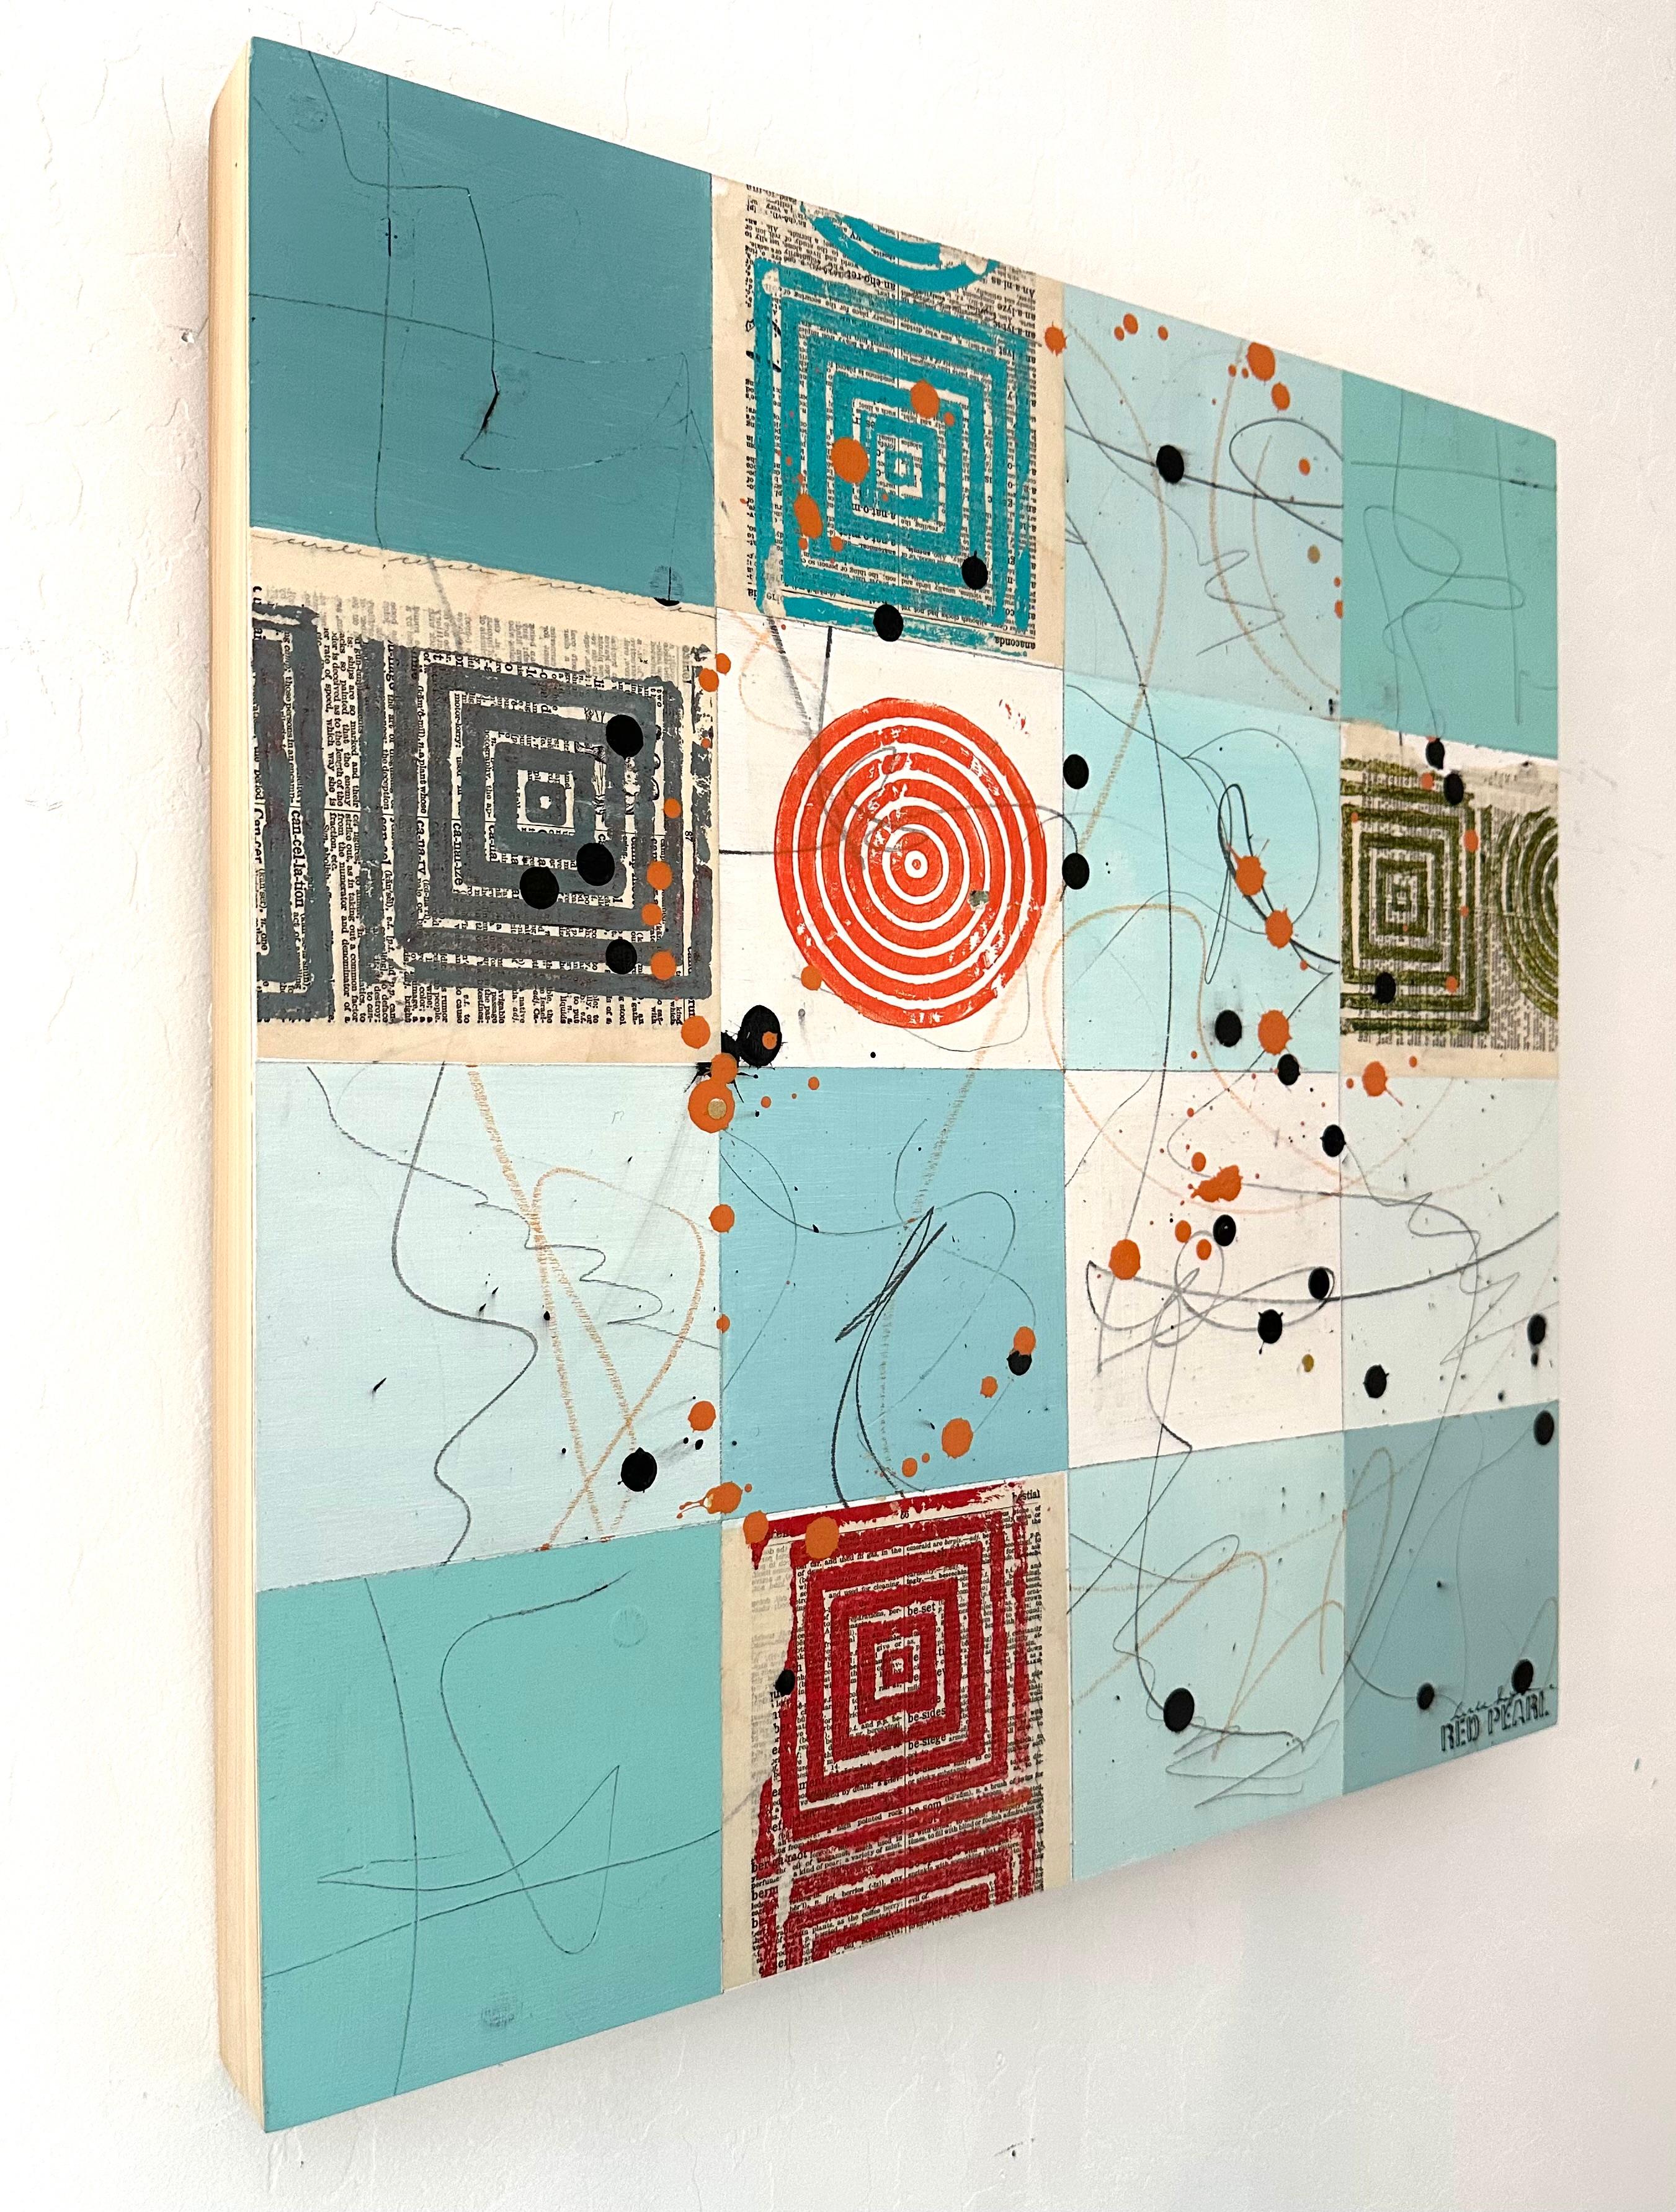 <p>Artist Comments<br>Splatters and geometric shapes bring variety to squares with different shades of blue. In creating the piece, artist Linda Shaffer takes inspiration from her love of travel and the exploration of possibilities in traversing